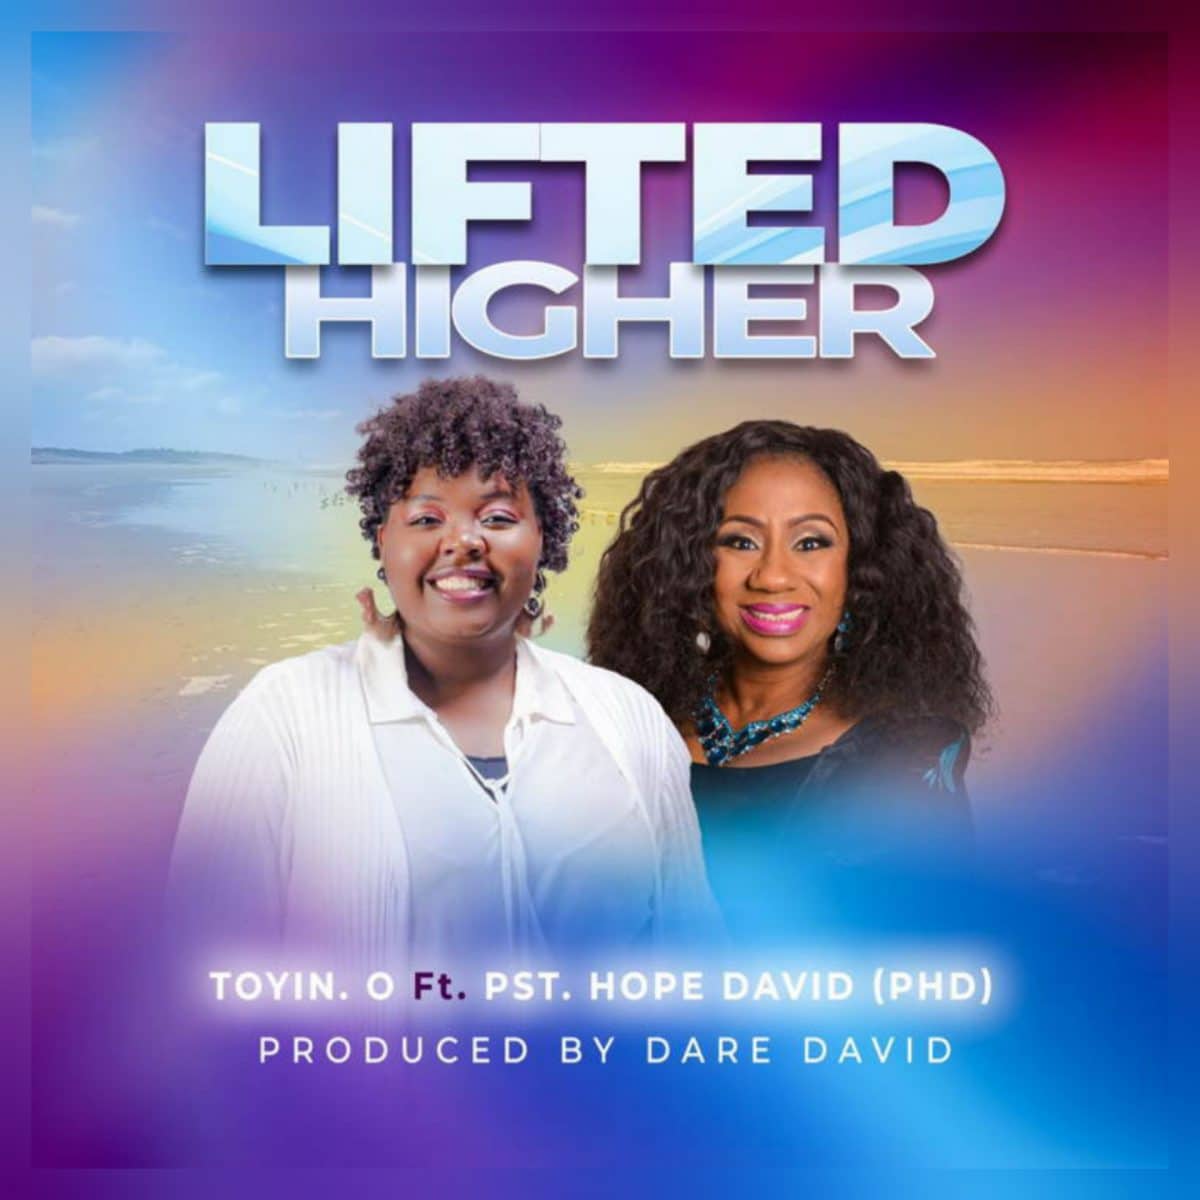 Lifted Higher By Toyin O Ft. Pst. Hope David